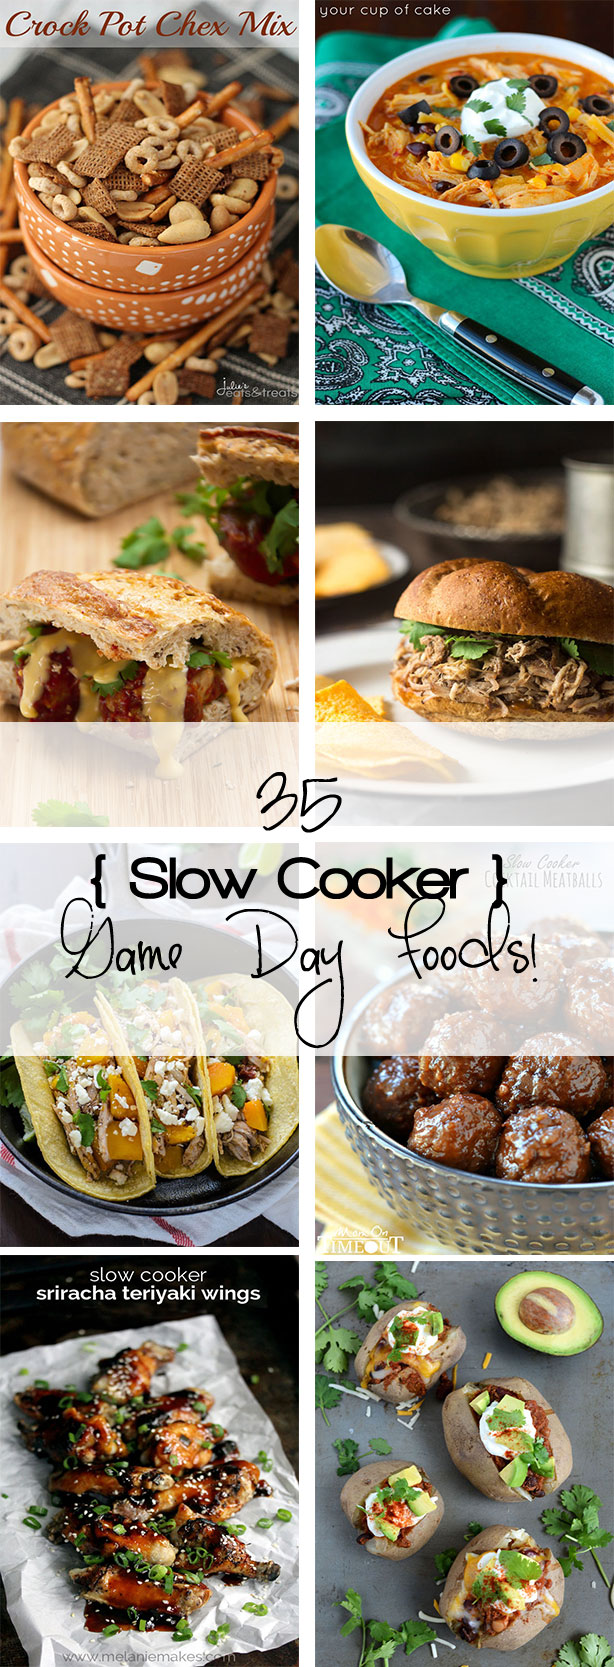 35 recipes to help you curb your cravings for favorite game day foods! And slow cooker versions to make it even better!